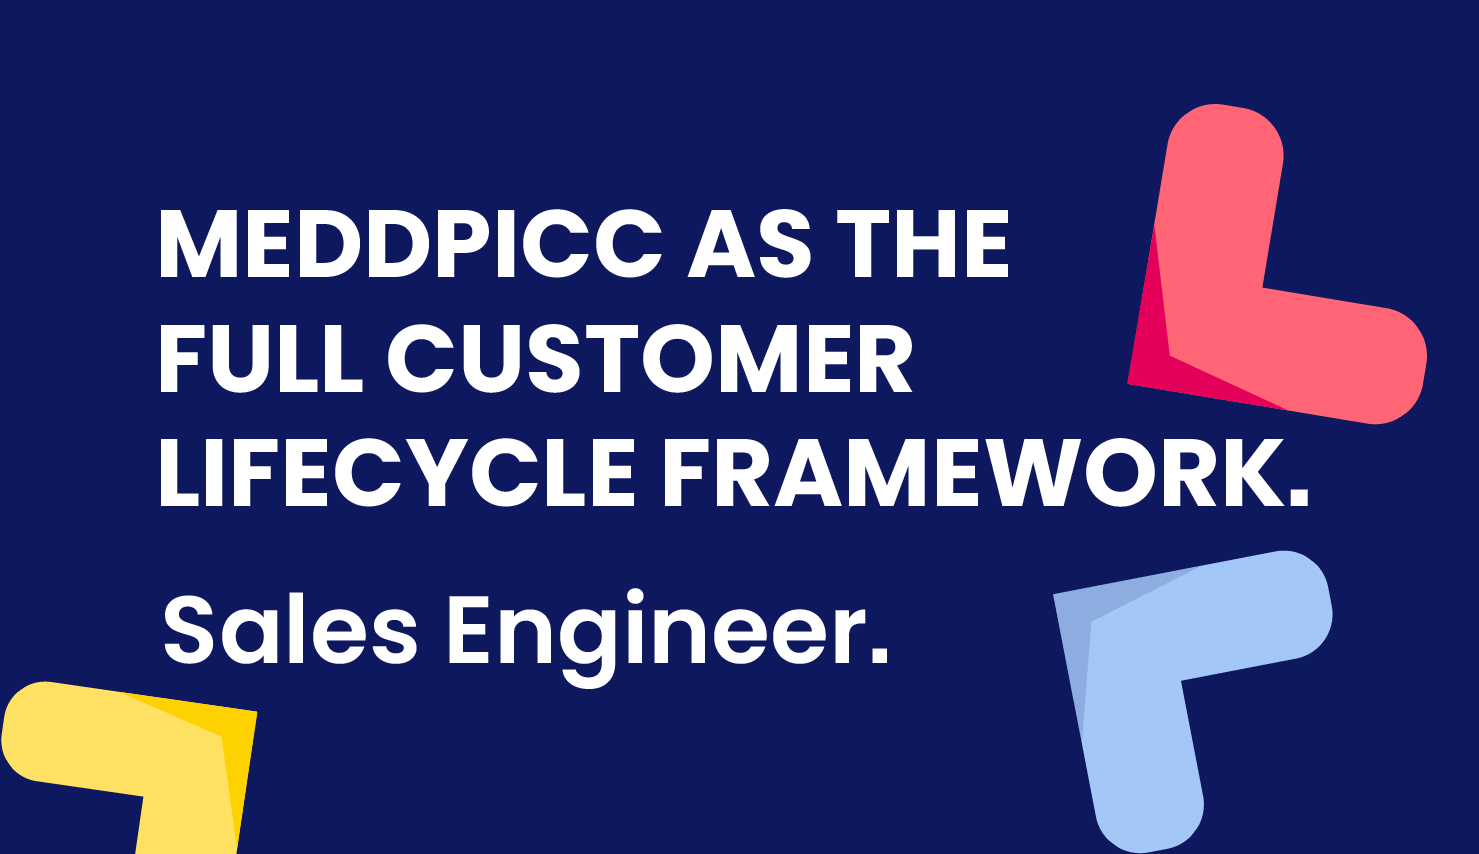 MEDDPICC as the Full Customer Lifecycle Framework: Sales Engineer